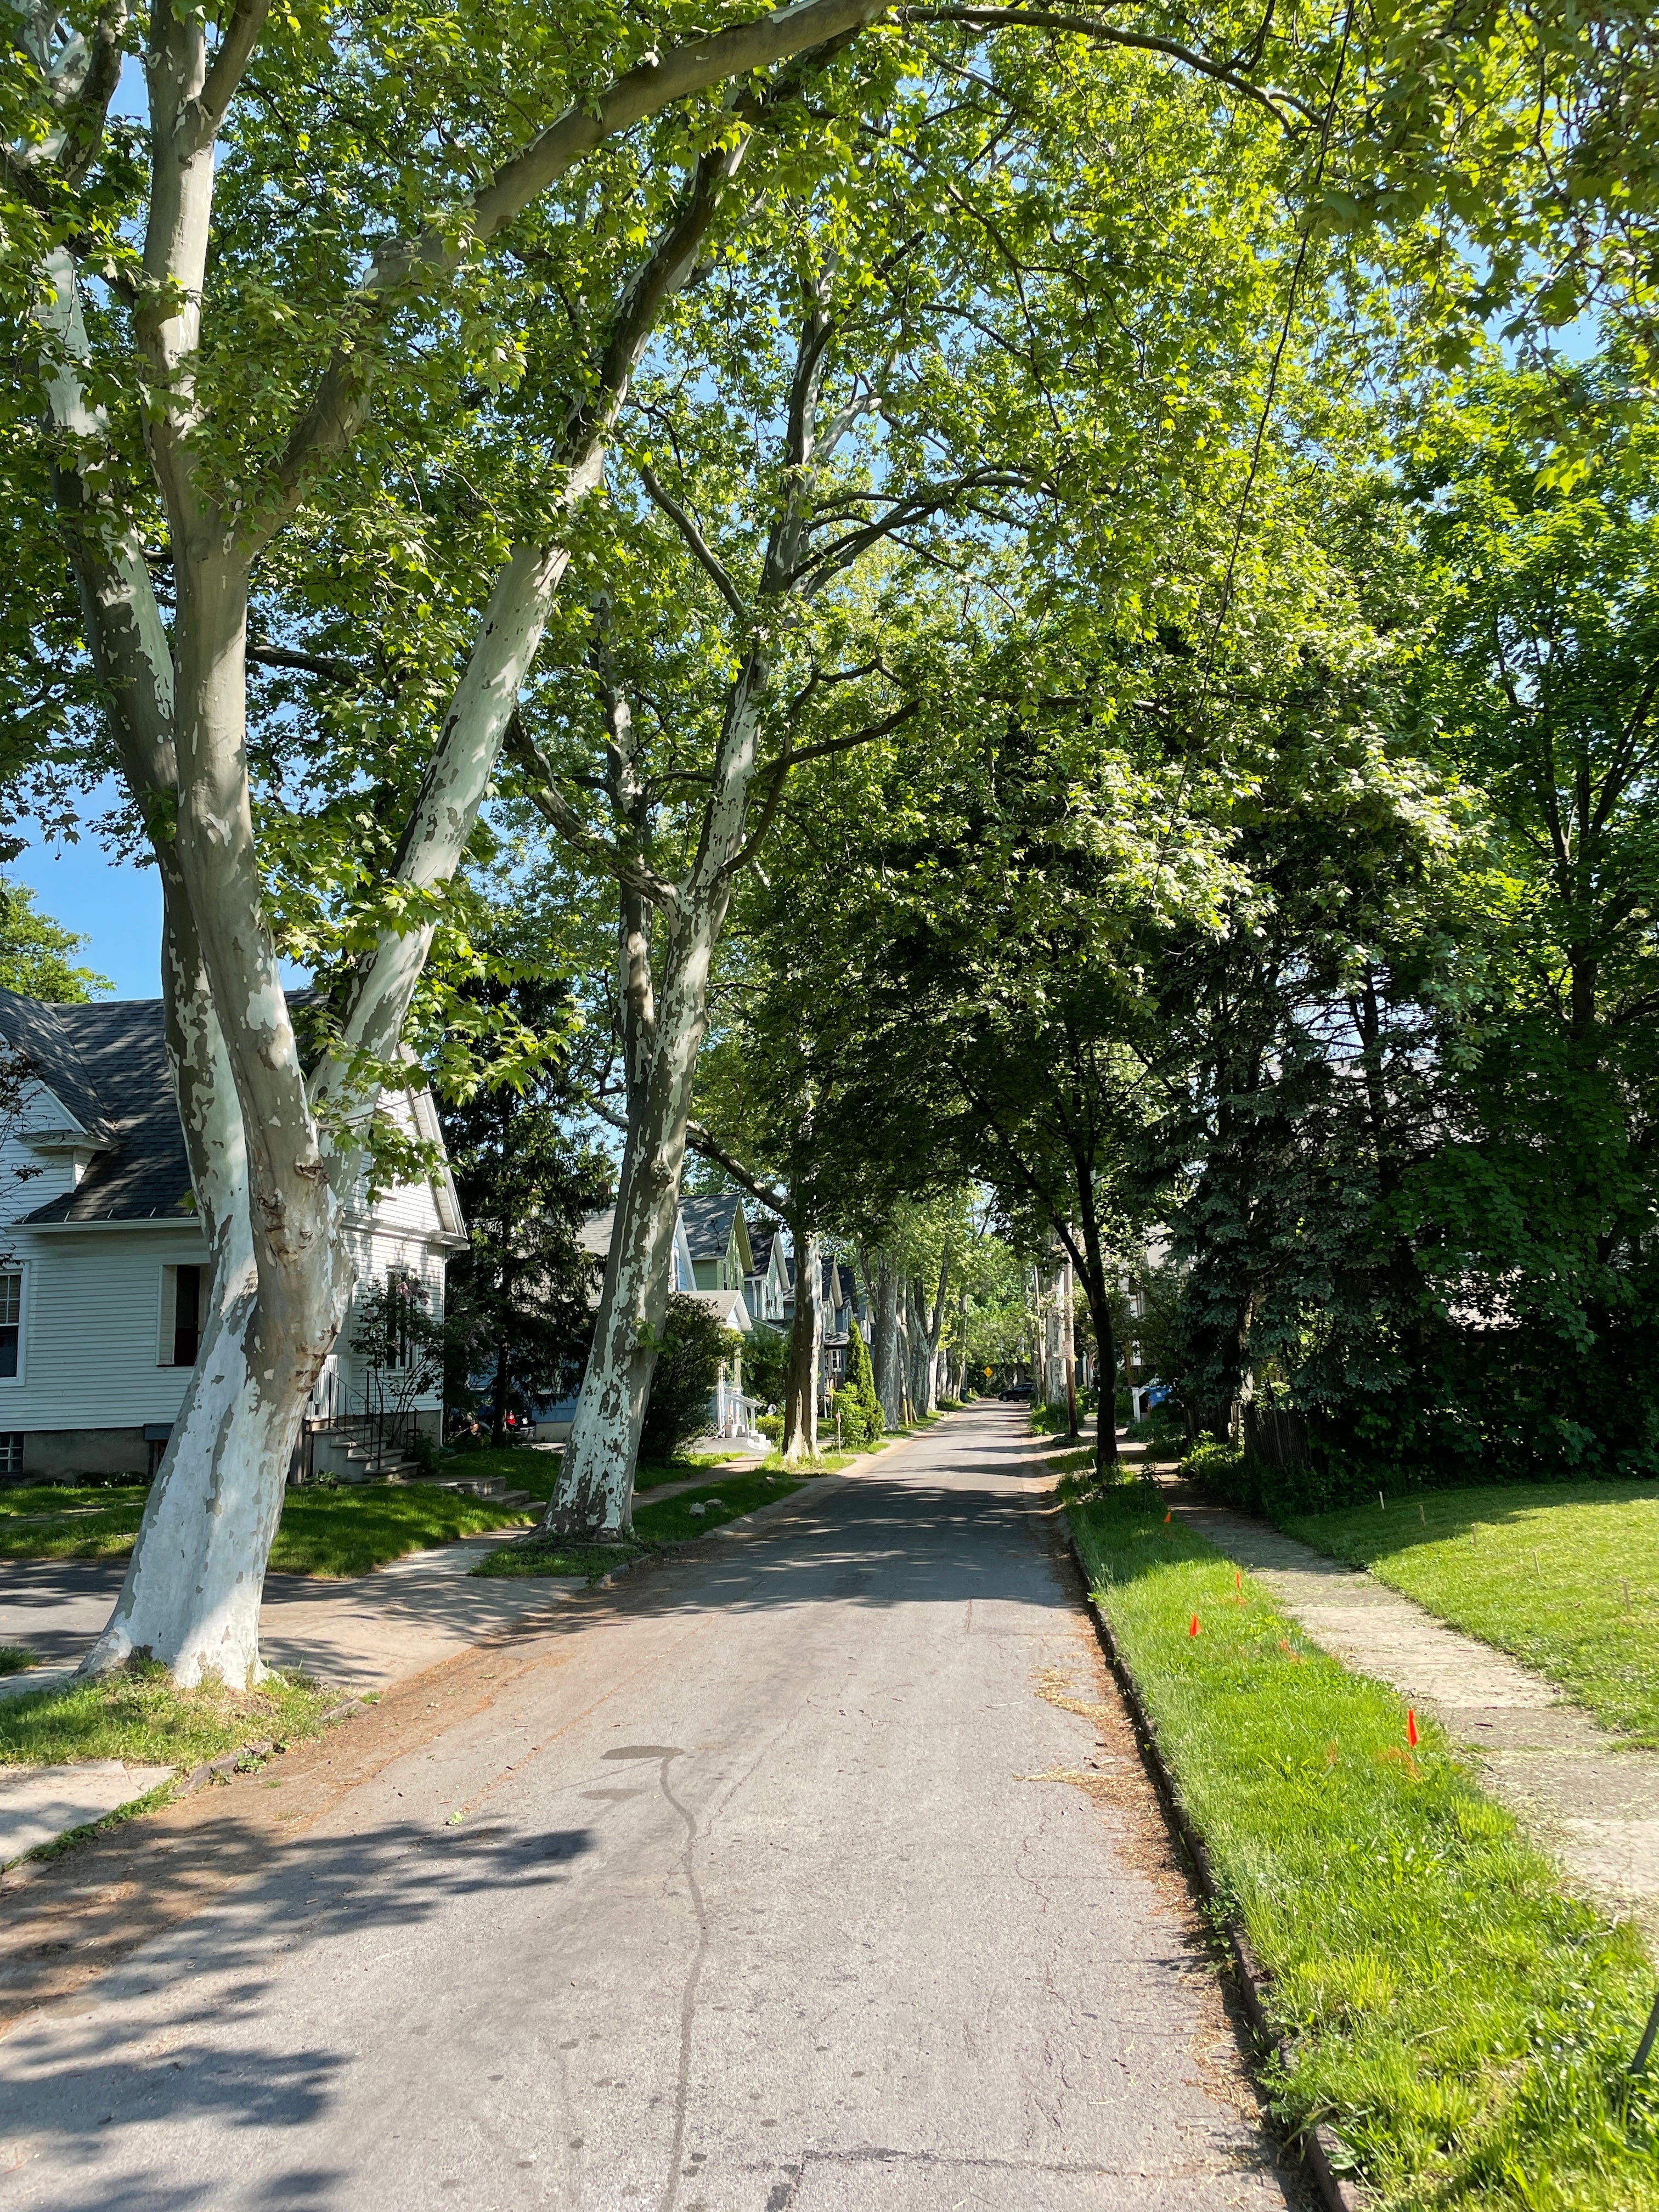 Tree Stories: Rodenbeck Place. "I had always seen old photos of the many streets in Rochester lined with elm trees, but had never been able to understand the awe-inspiring beauty of a sylvan cathedral like that on Rodenbeck Place," Chris Brandt said.